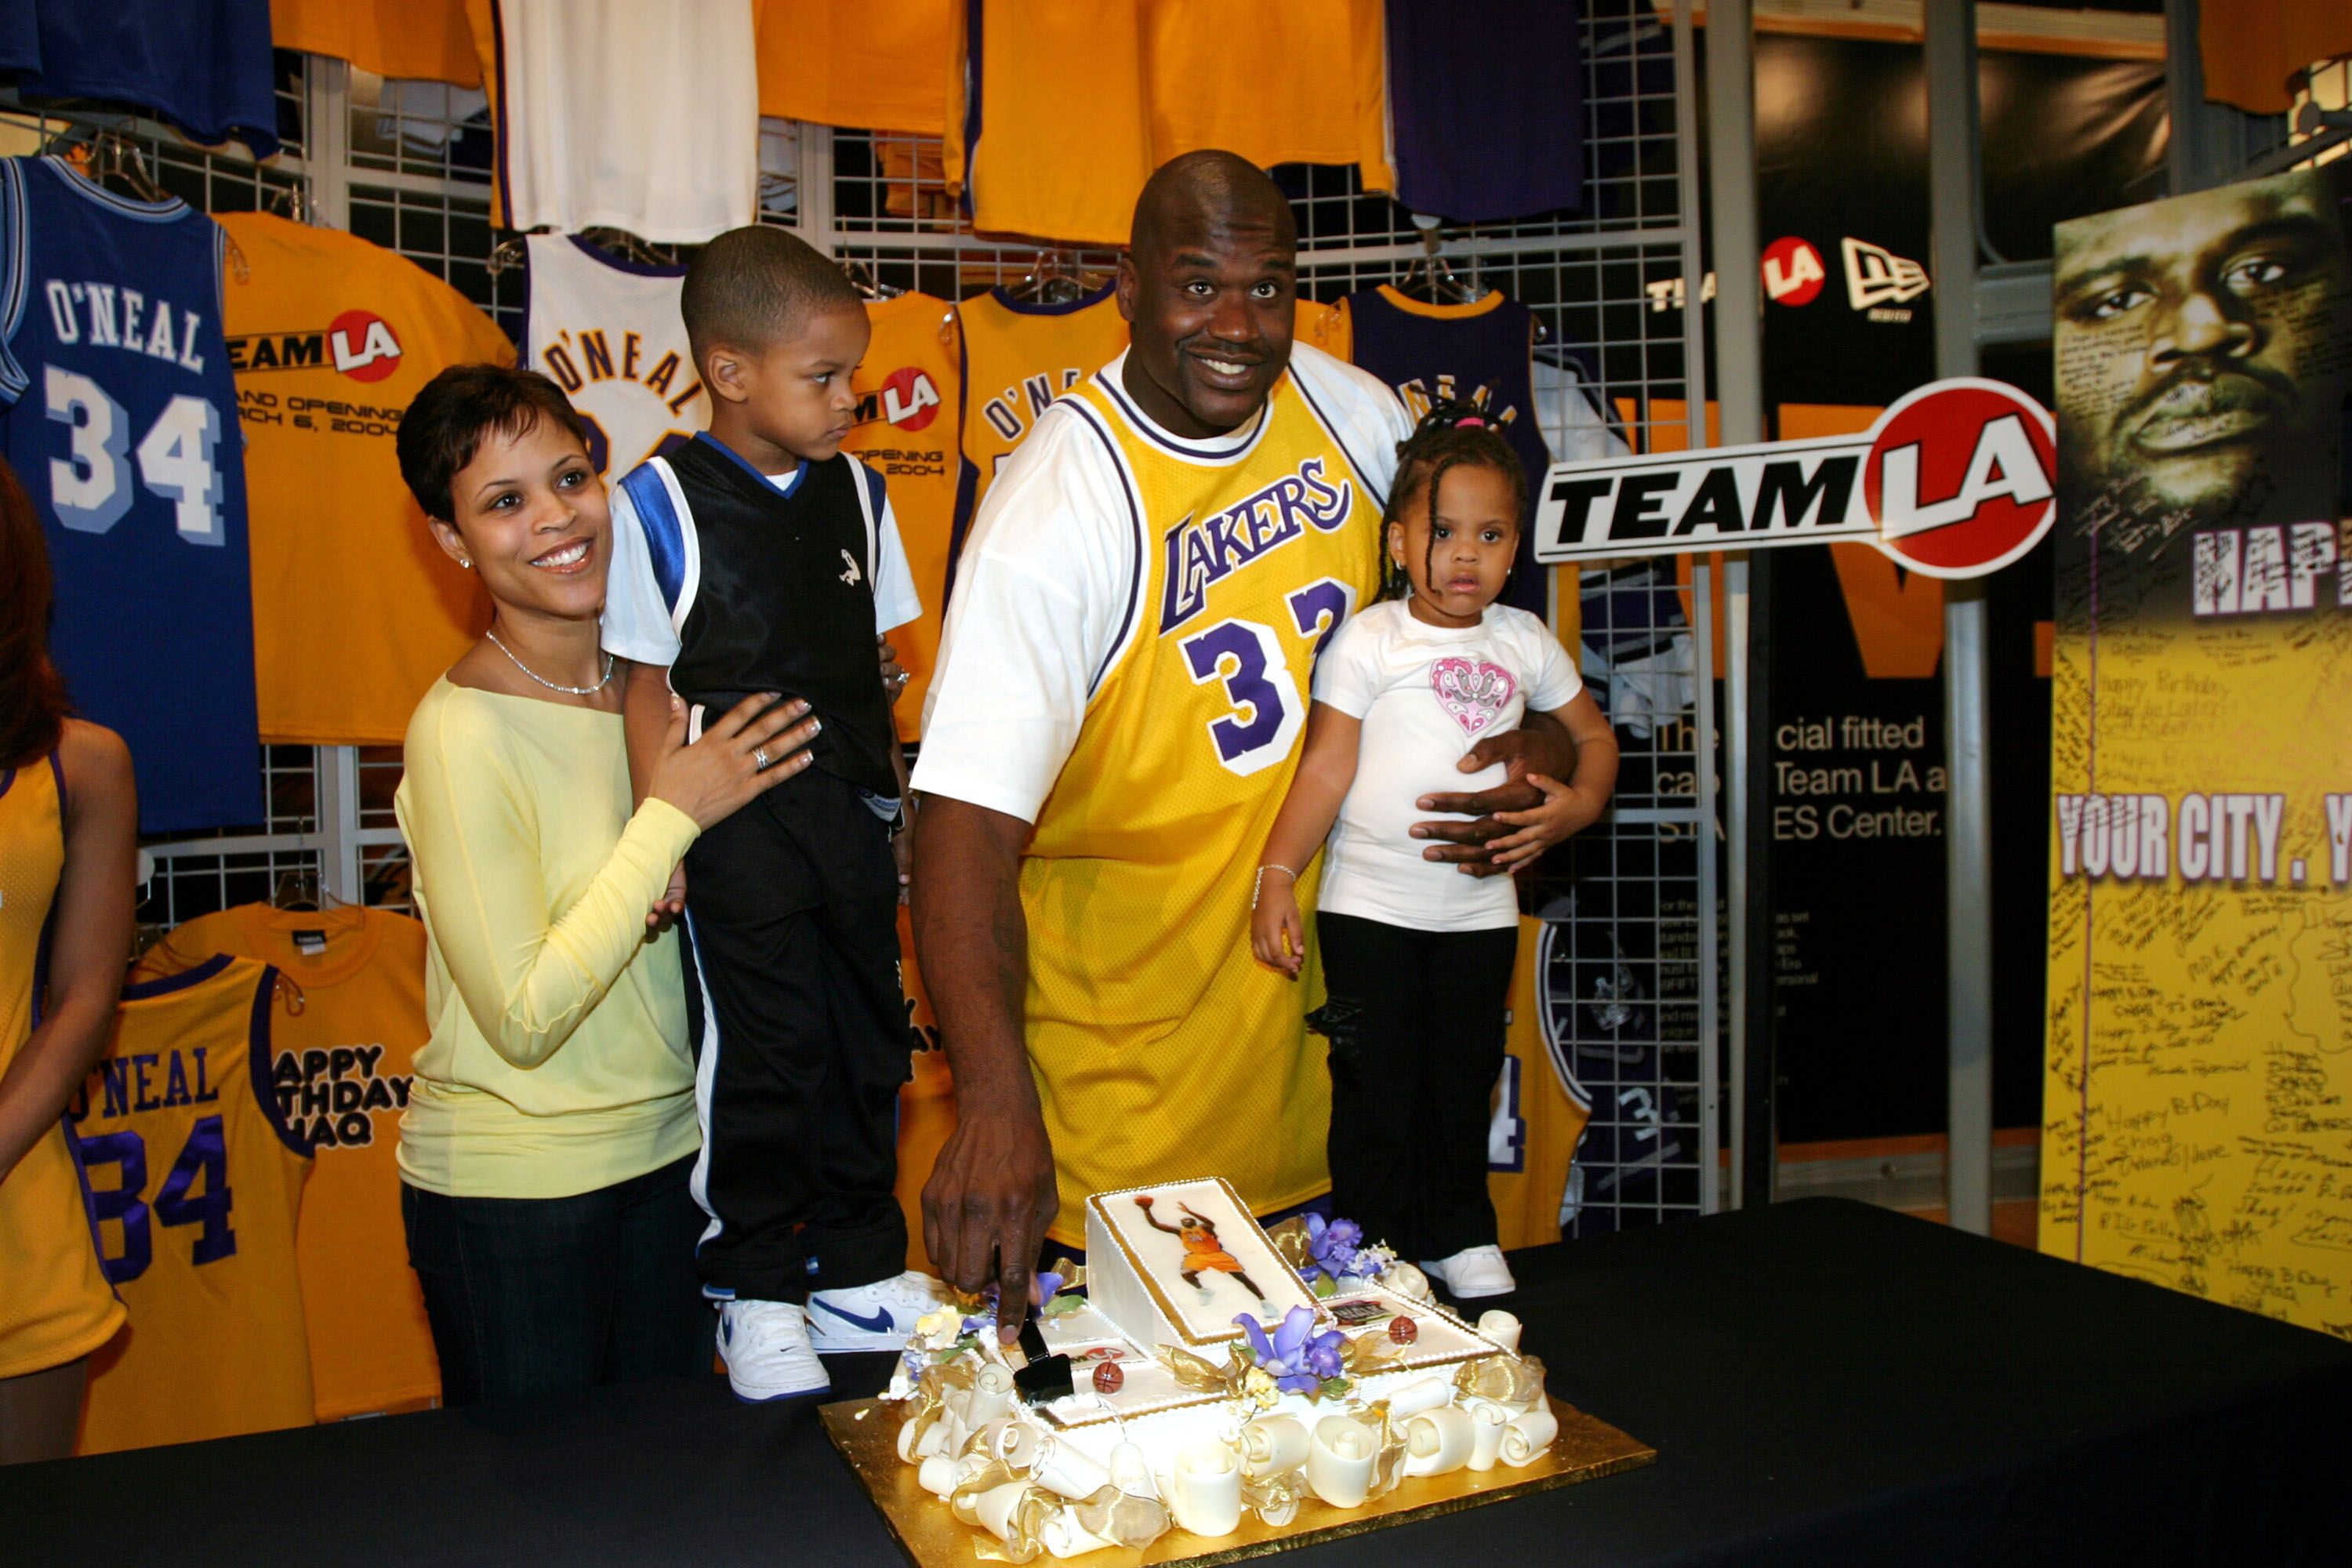 Shaquille O'Neal with ex-wife Shaunie and his children Shareef and Amirah at the opening of Team LA Store in 2004 in Los Angeles, California | Source: Getty Images